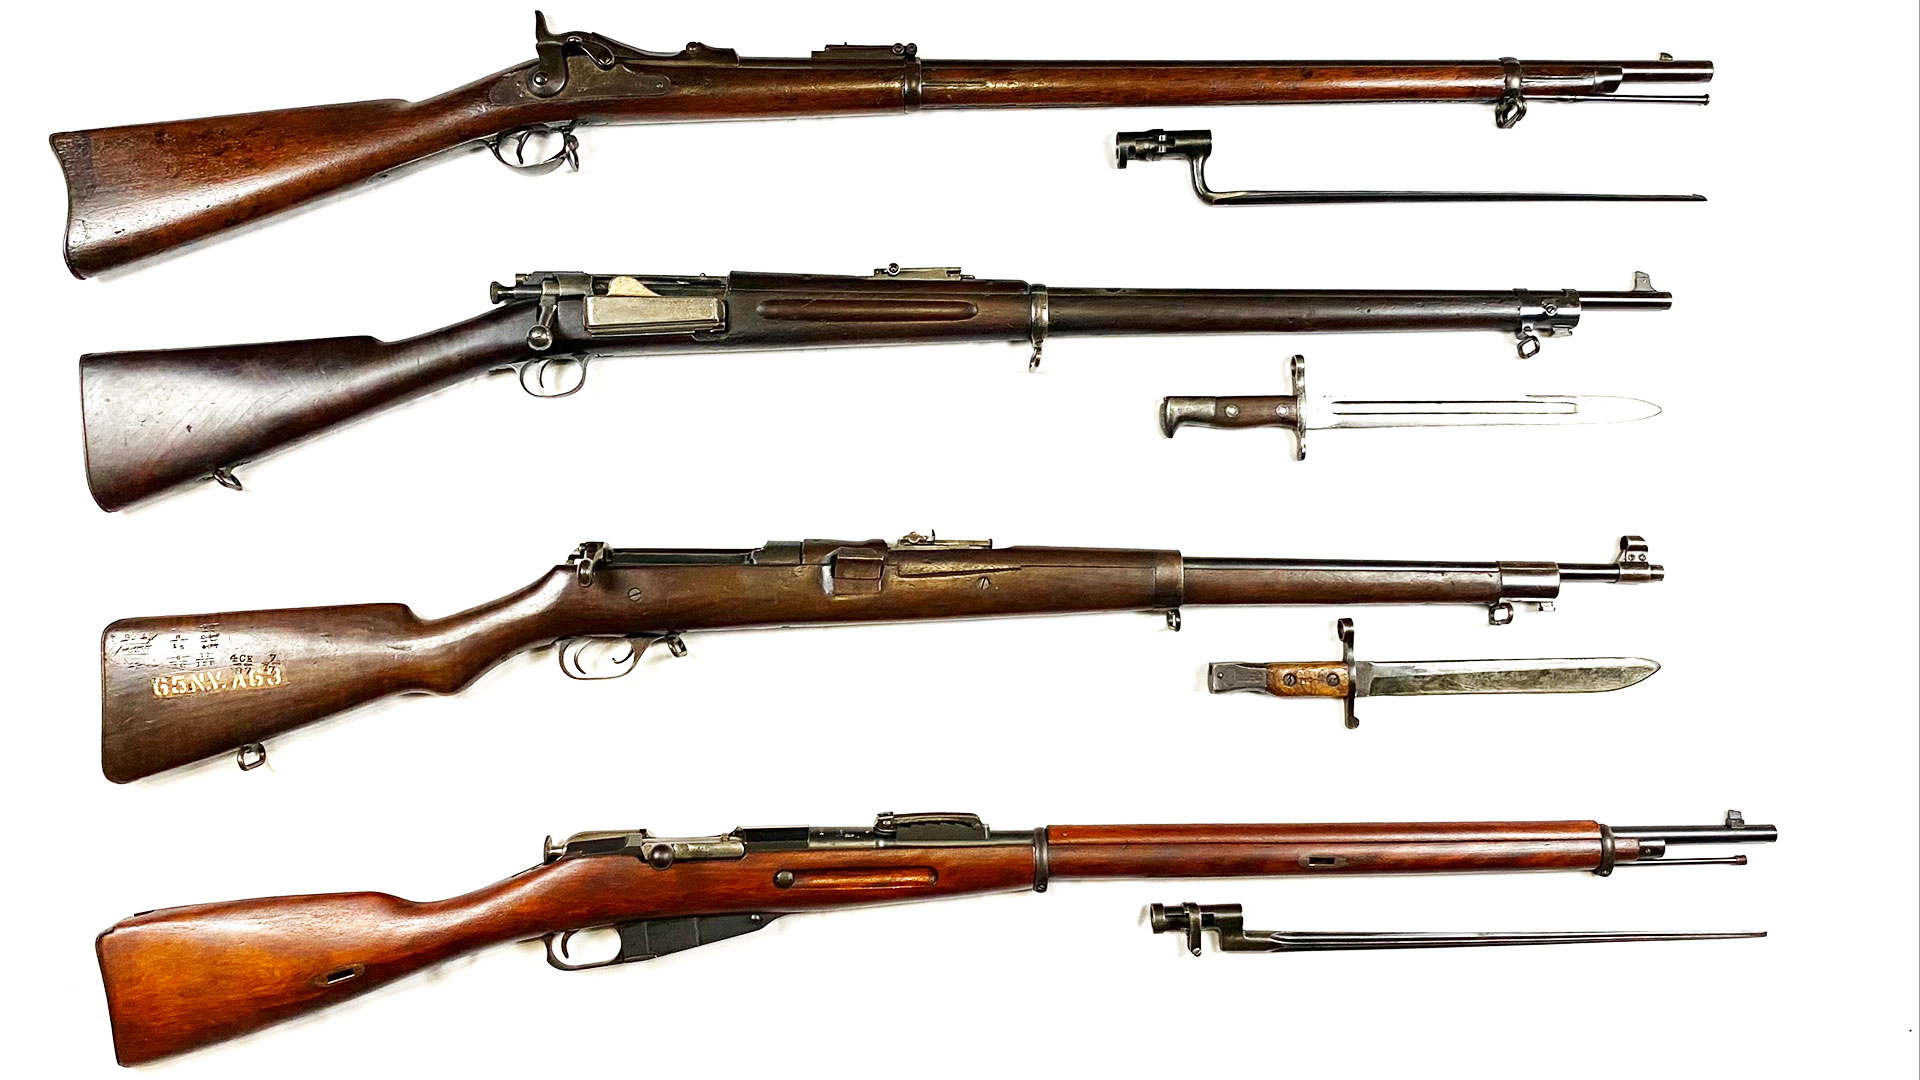 Ww1 American Weapons